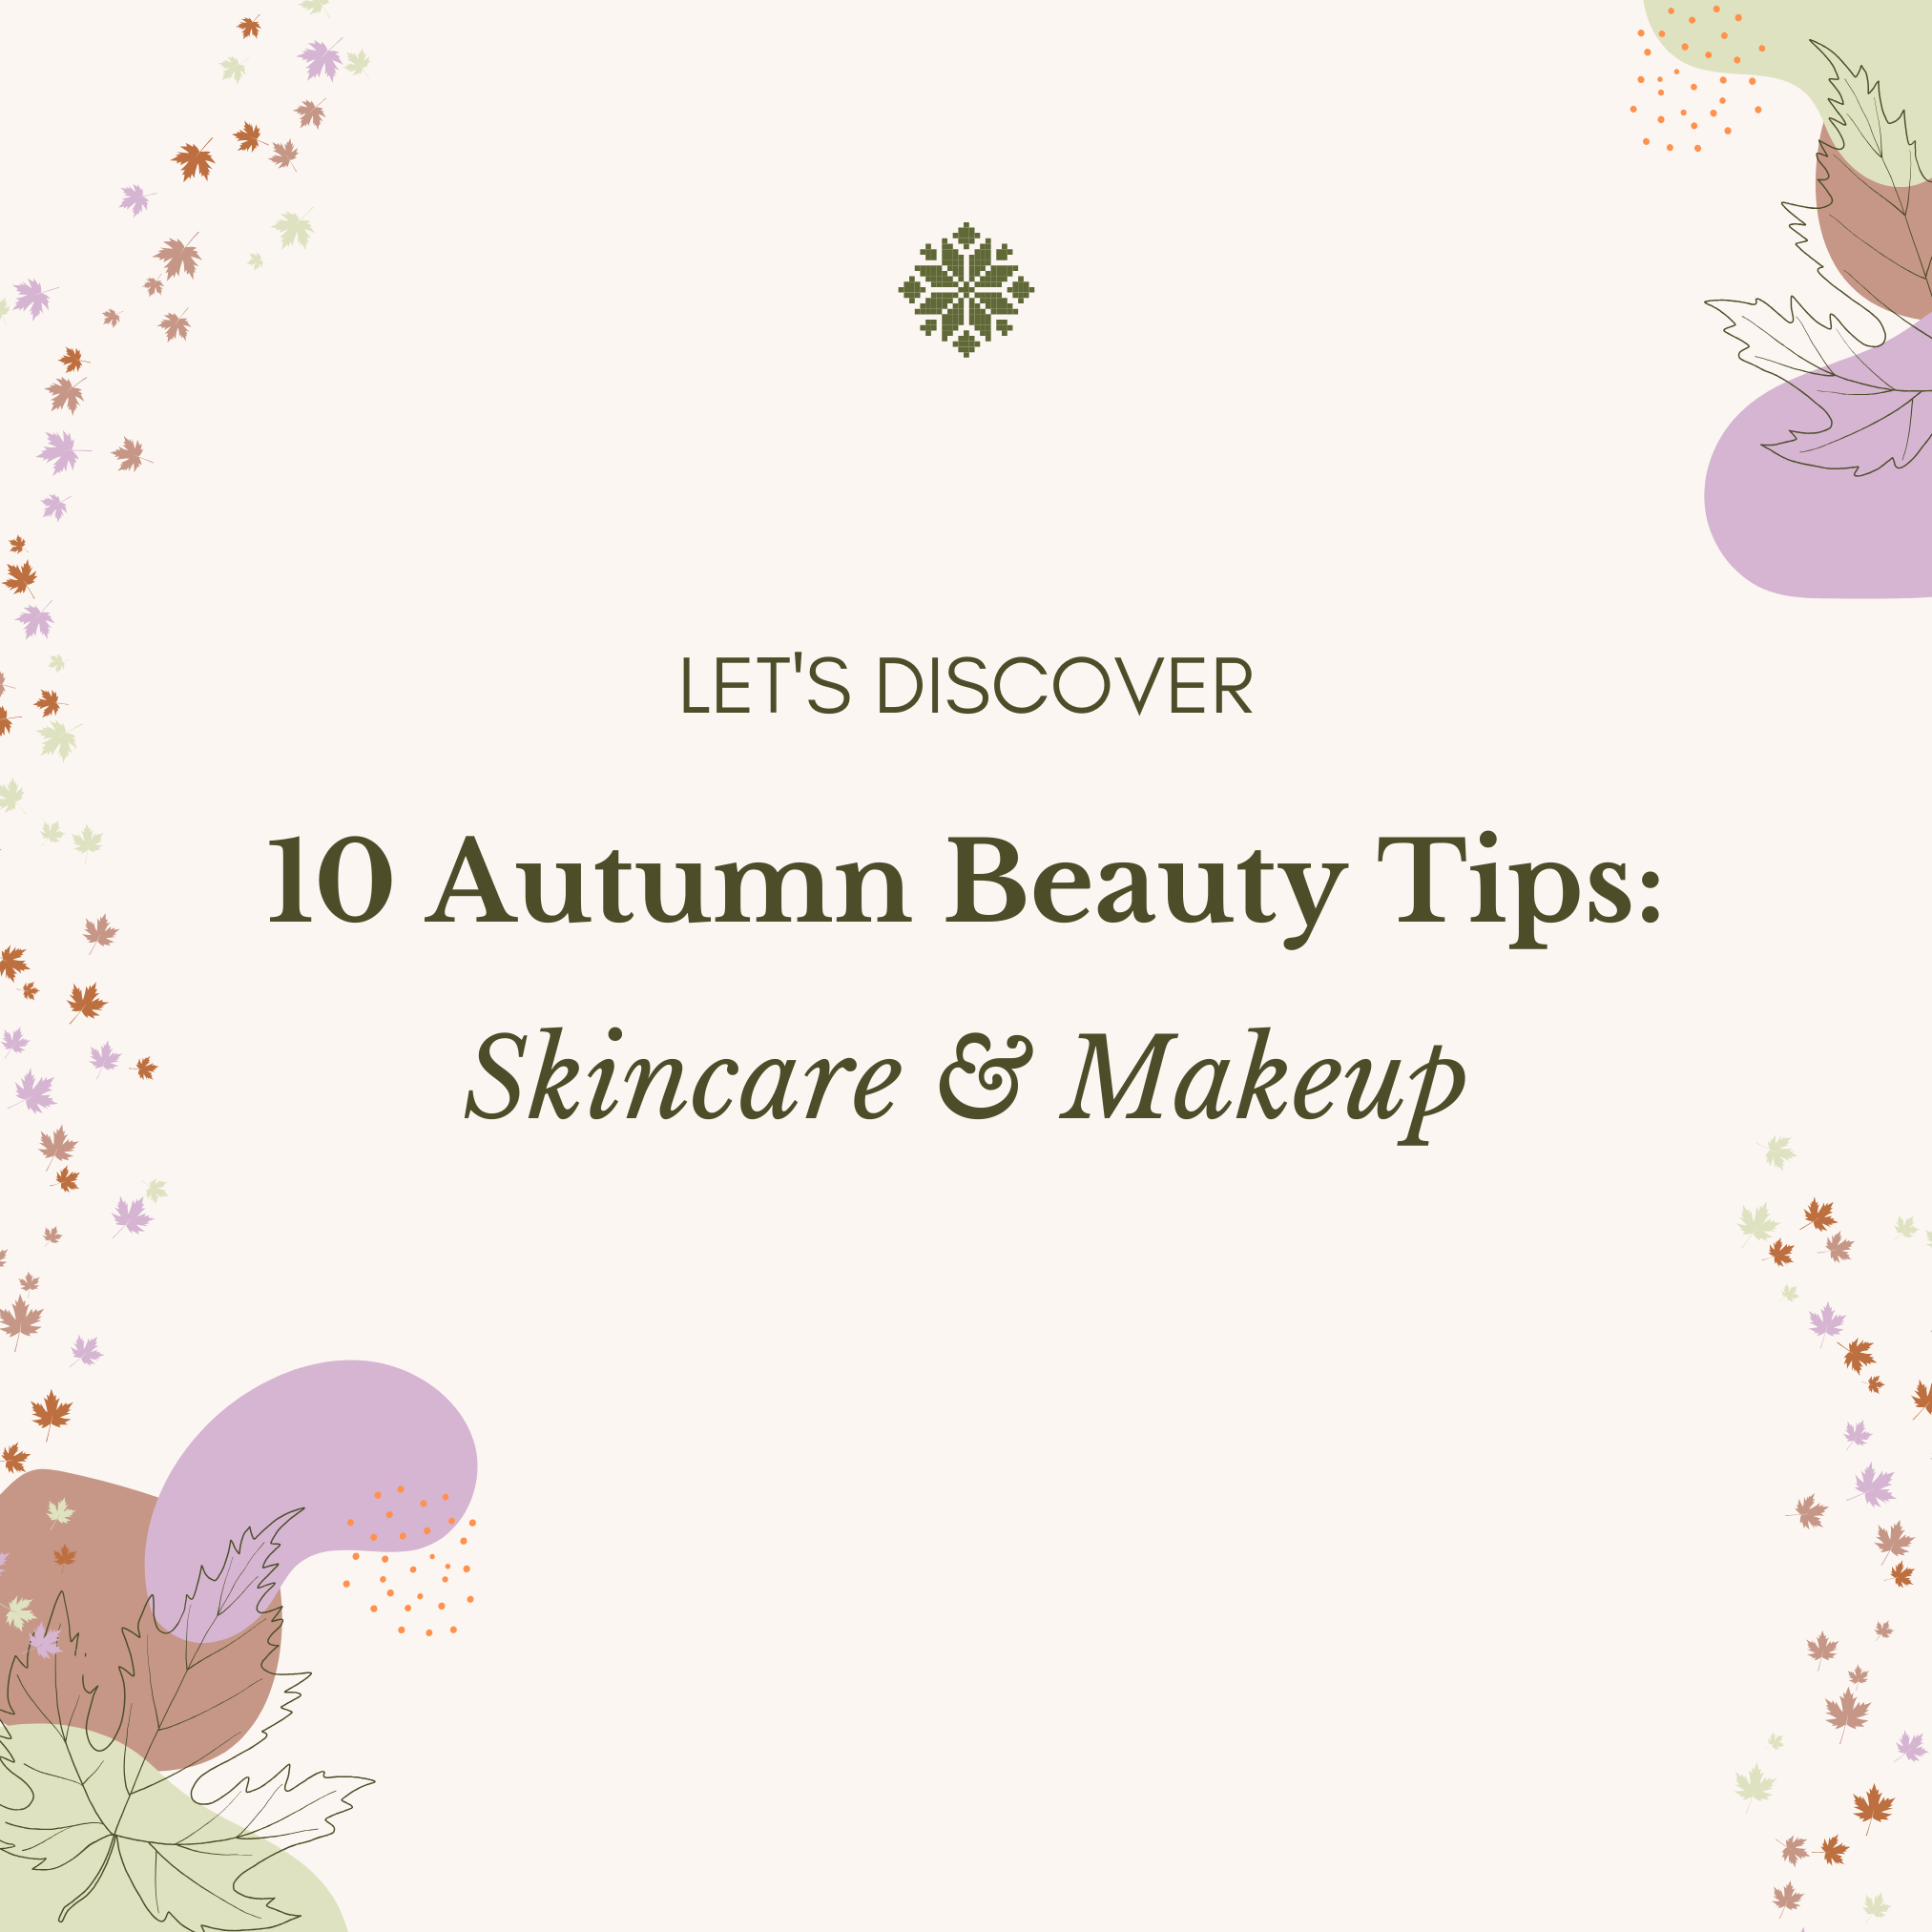 10 Autumn Beauty Tips: Embrace The Season With Skincare And Makeup